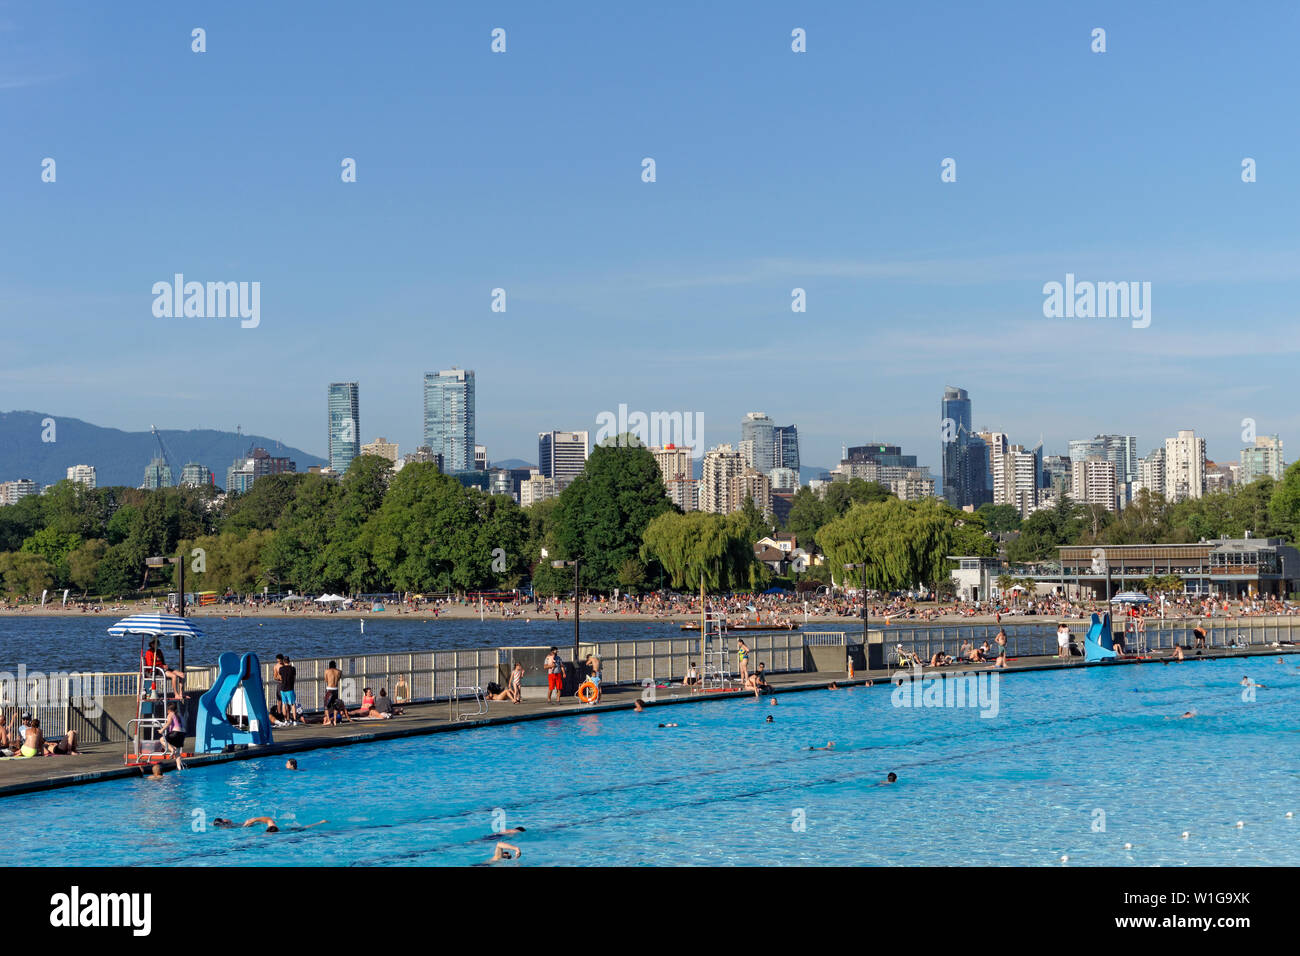 People swimming at Kitsilano Pool on English Bay with Kits Beach and the city skyline in background, Vancouver, British Columbia, Canada Stock Photo